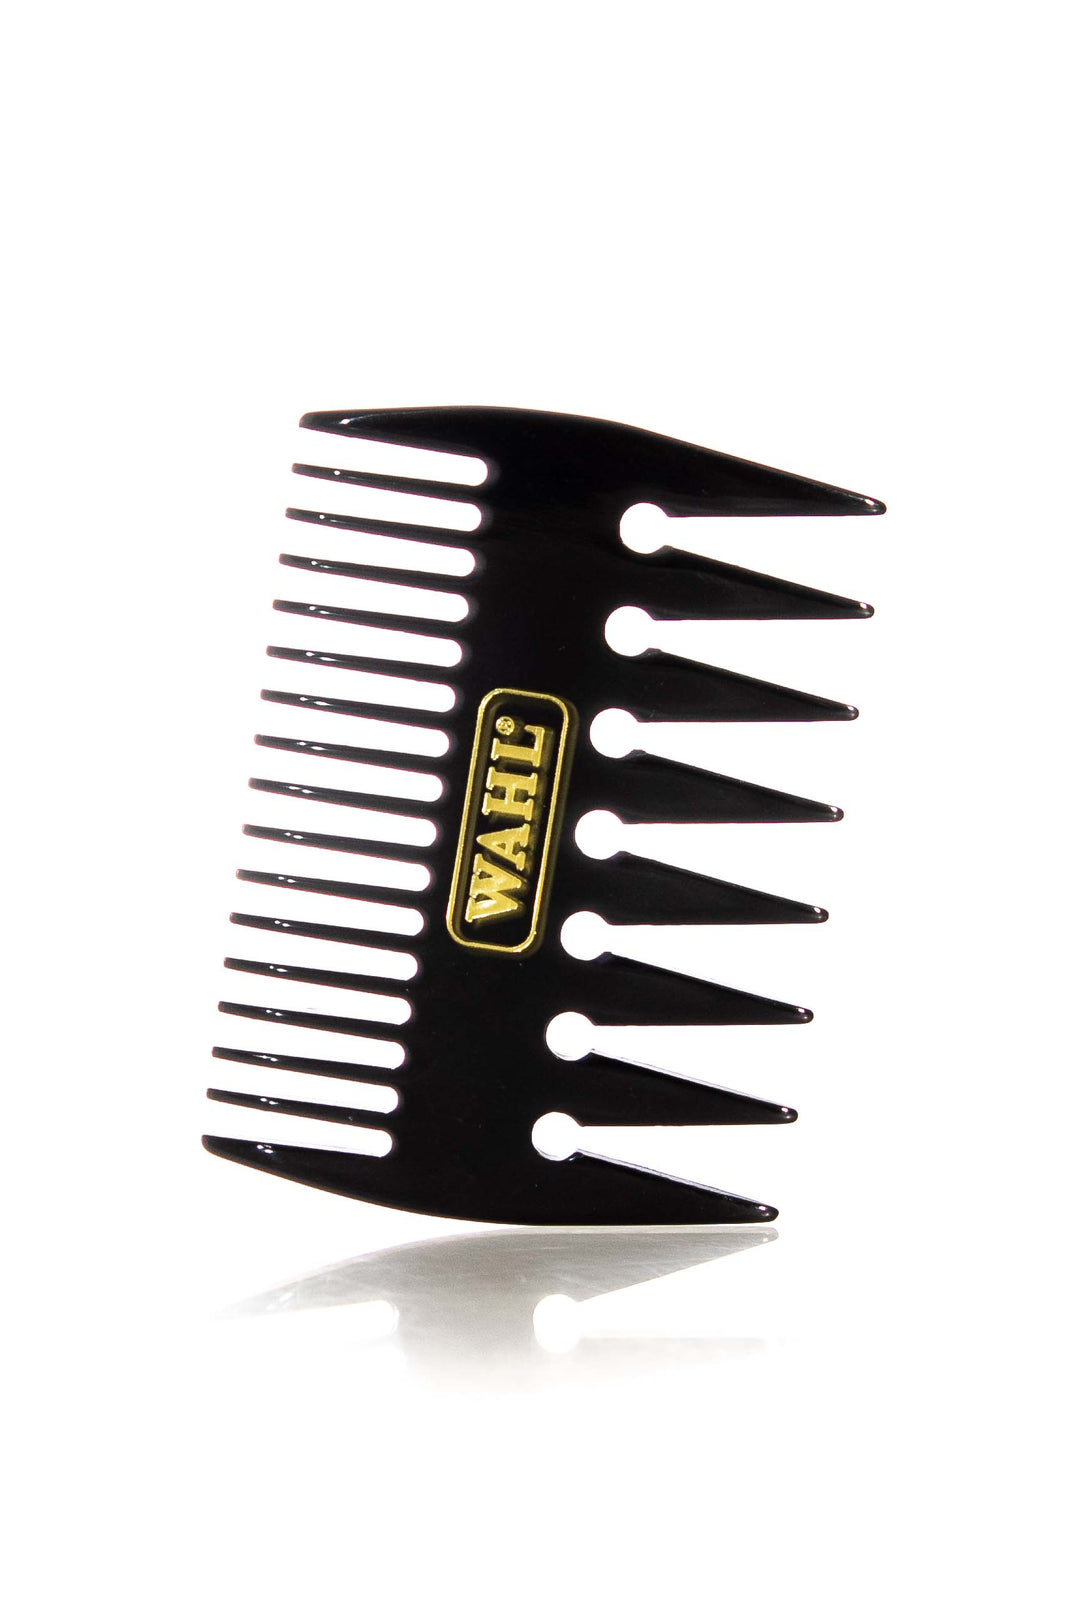 WAHL BLACK TWO-SIDED TEXTURISING COMB